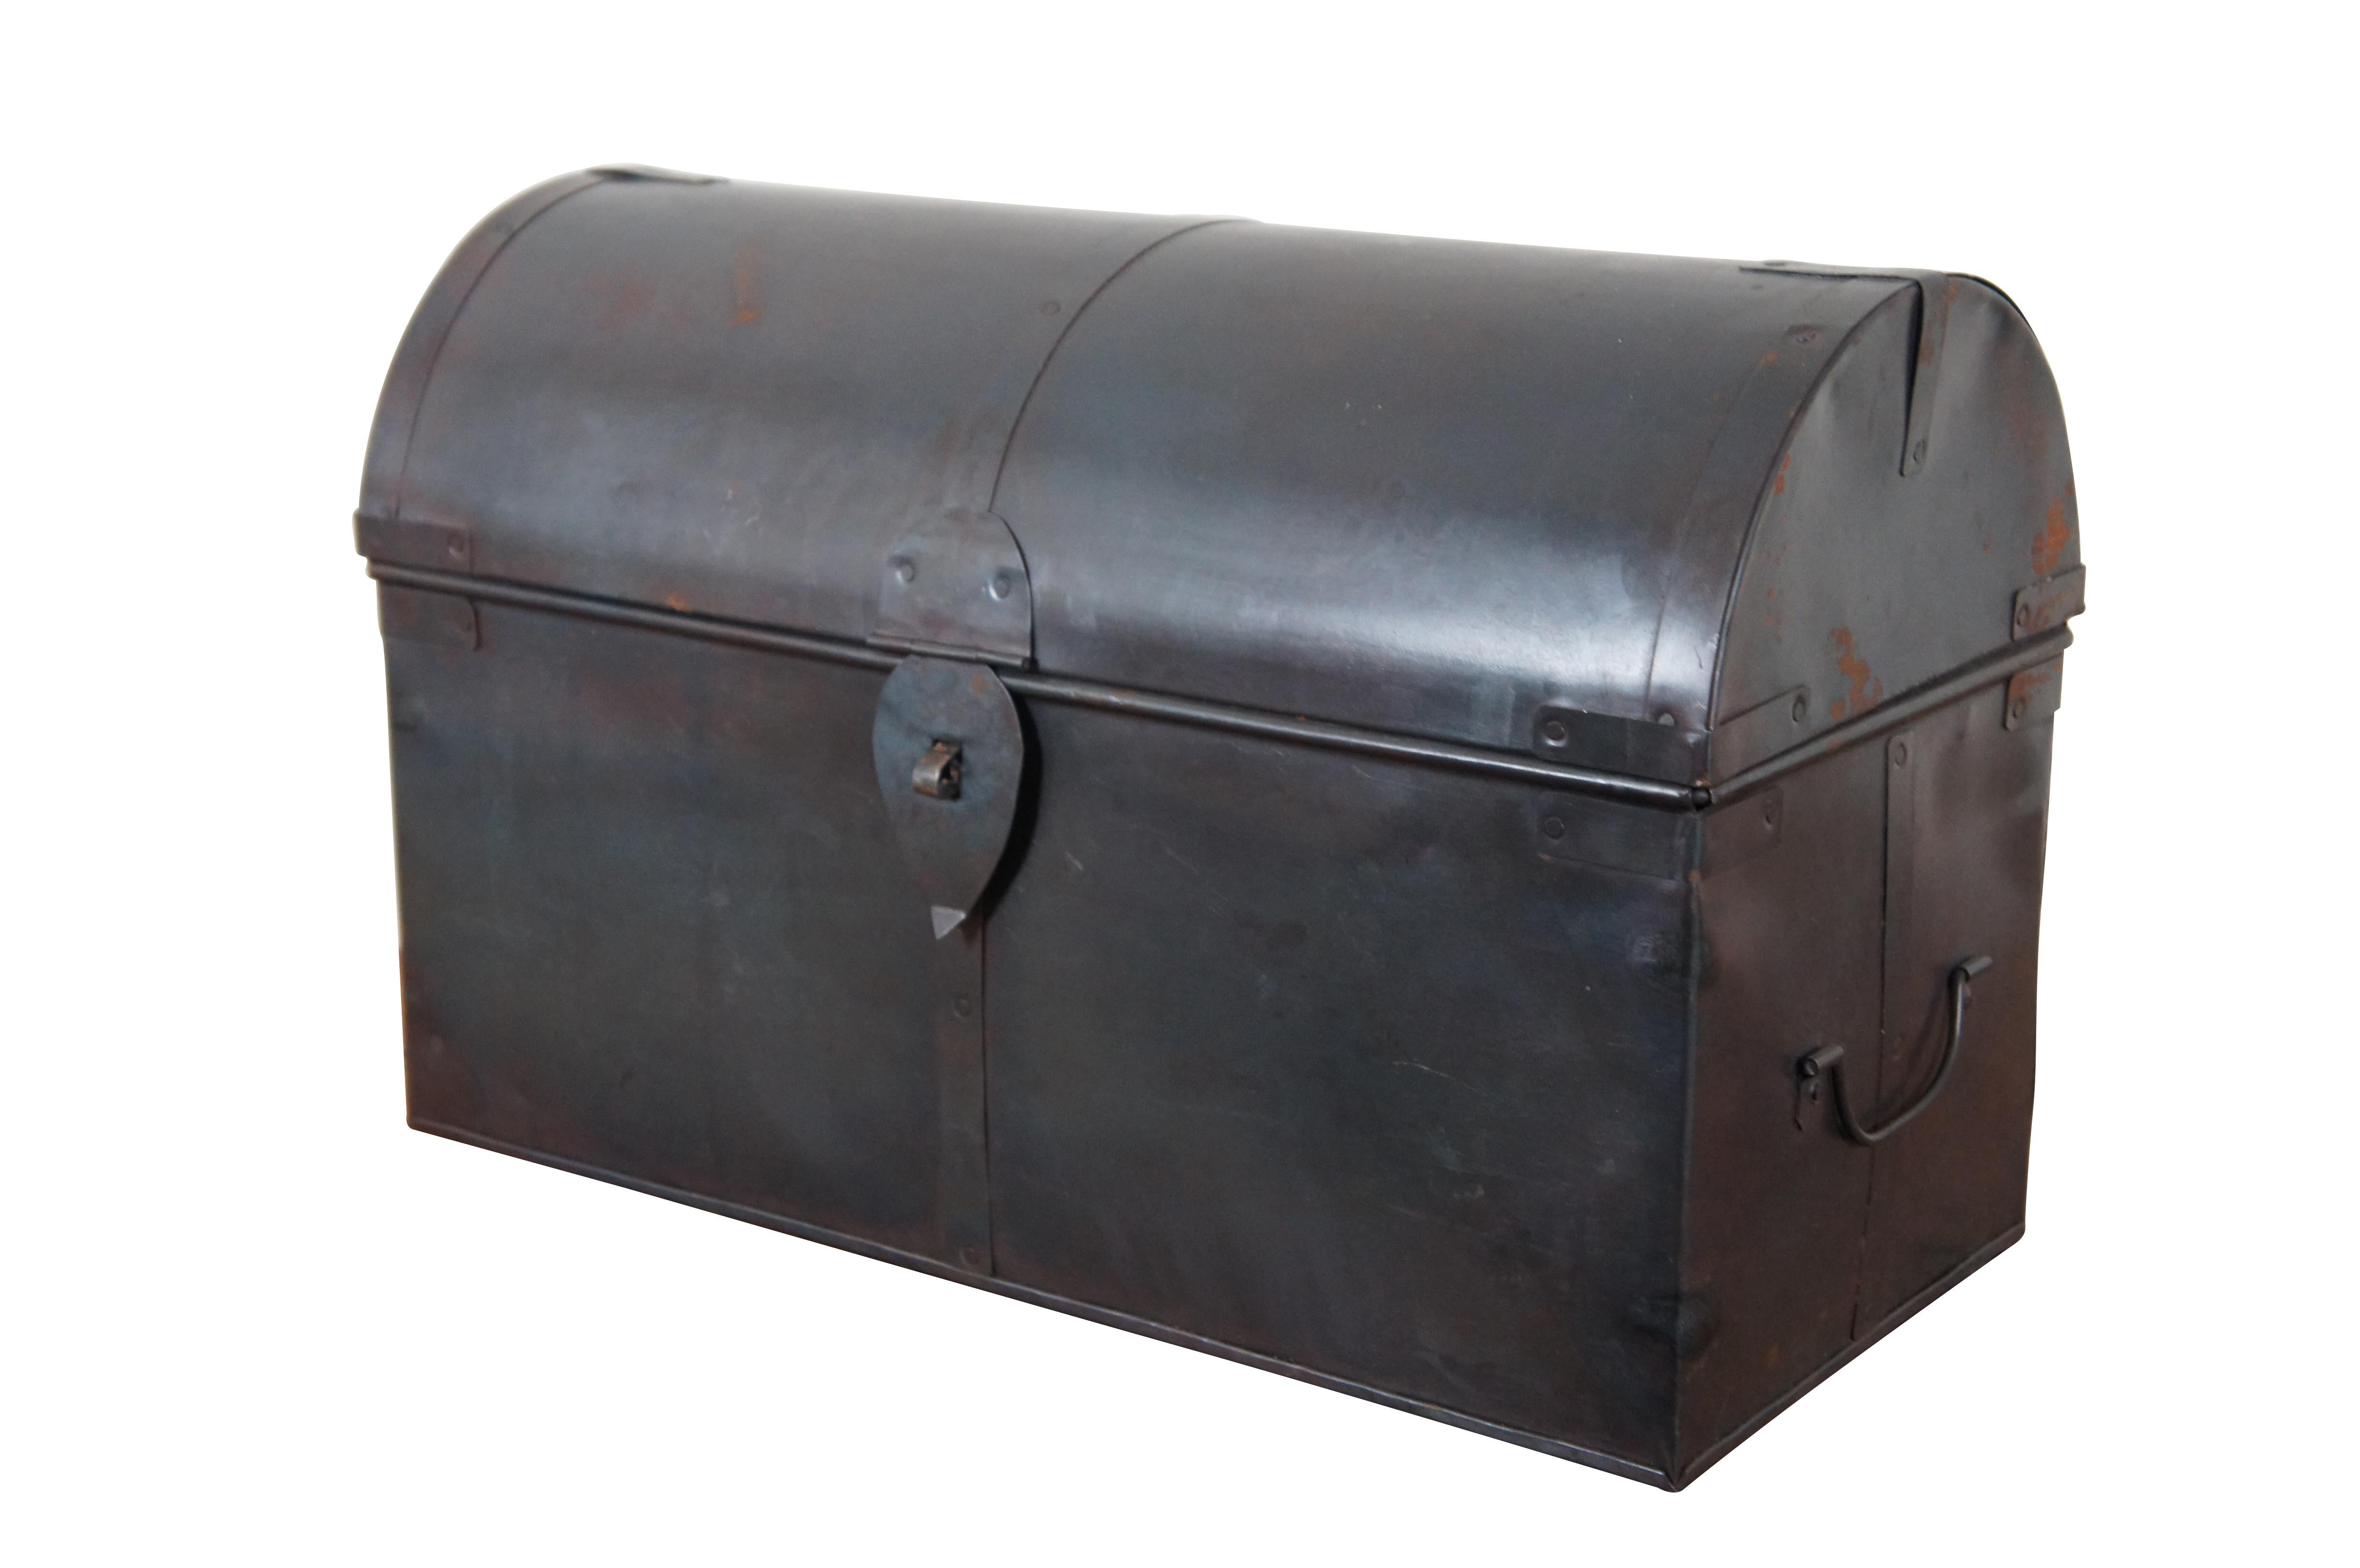 Vintage black metal box / chest / trunk in the shape of a mailbox featuring domed top with hasp on the front to accommodate lock / padlock, handles on each end, and a two tier non-removable insert featuring six holes for storing